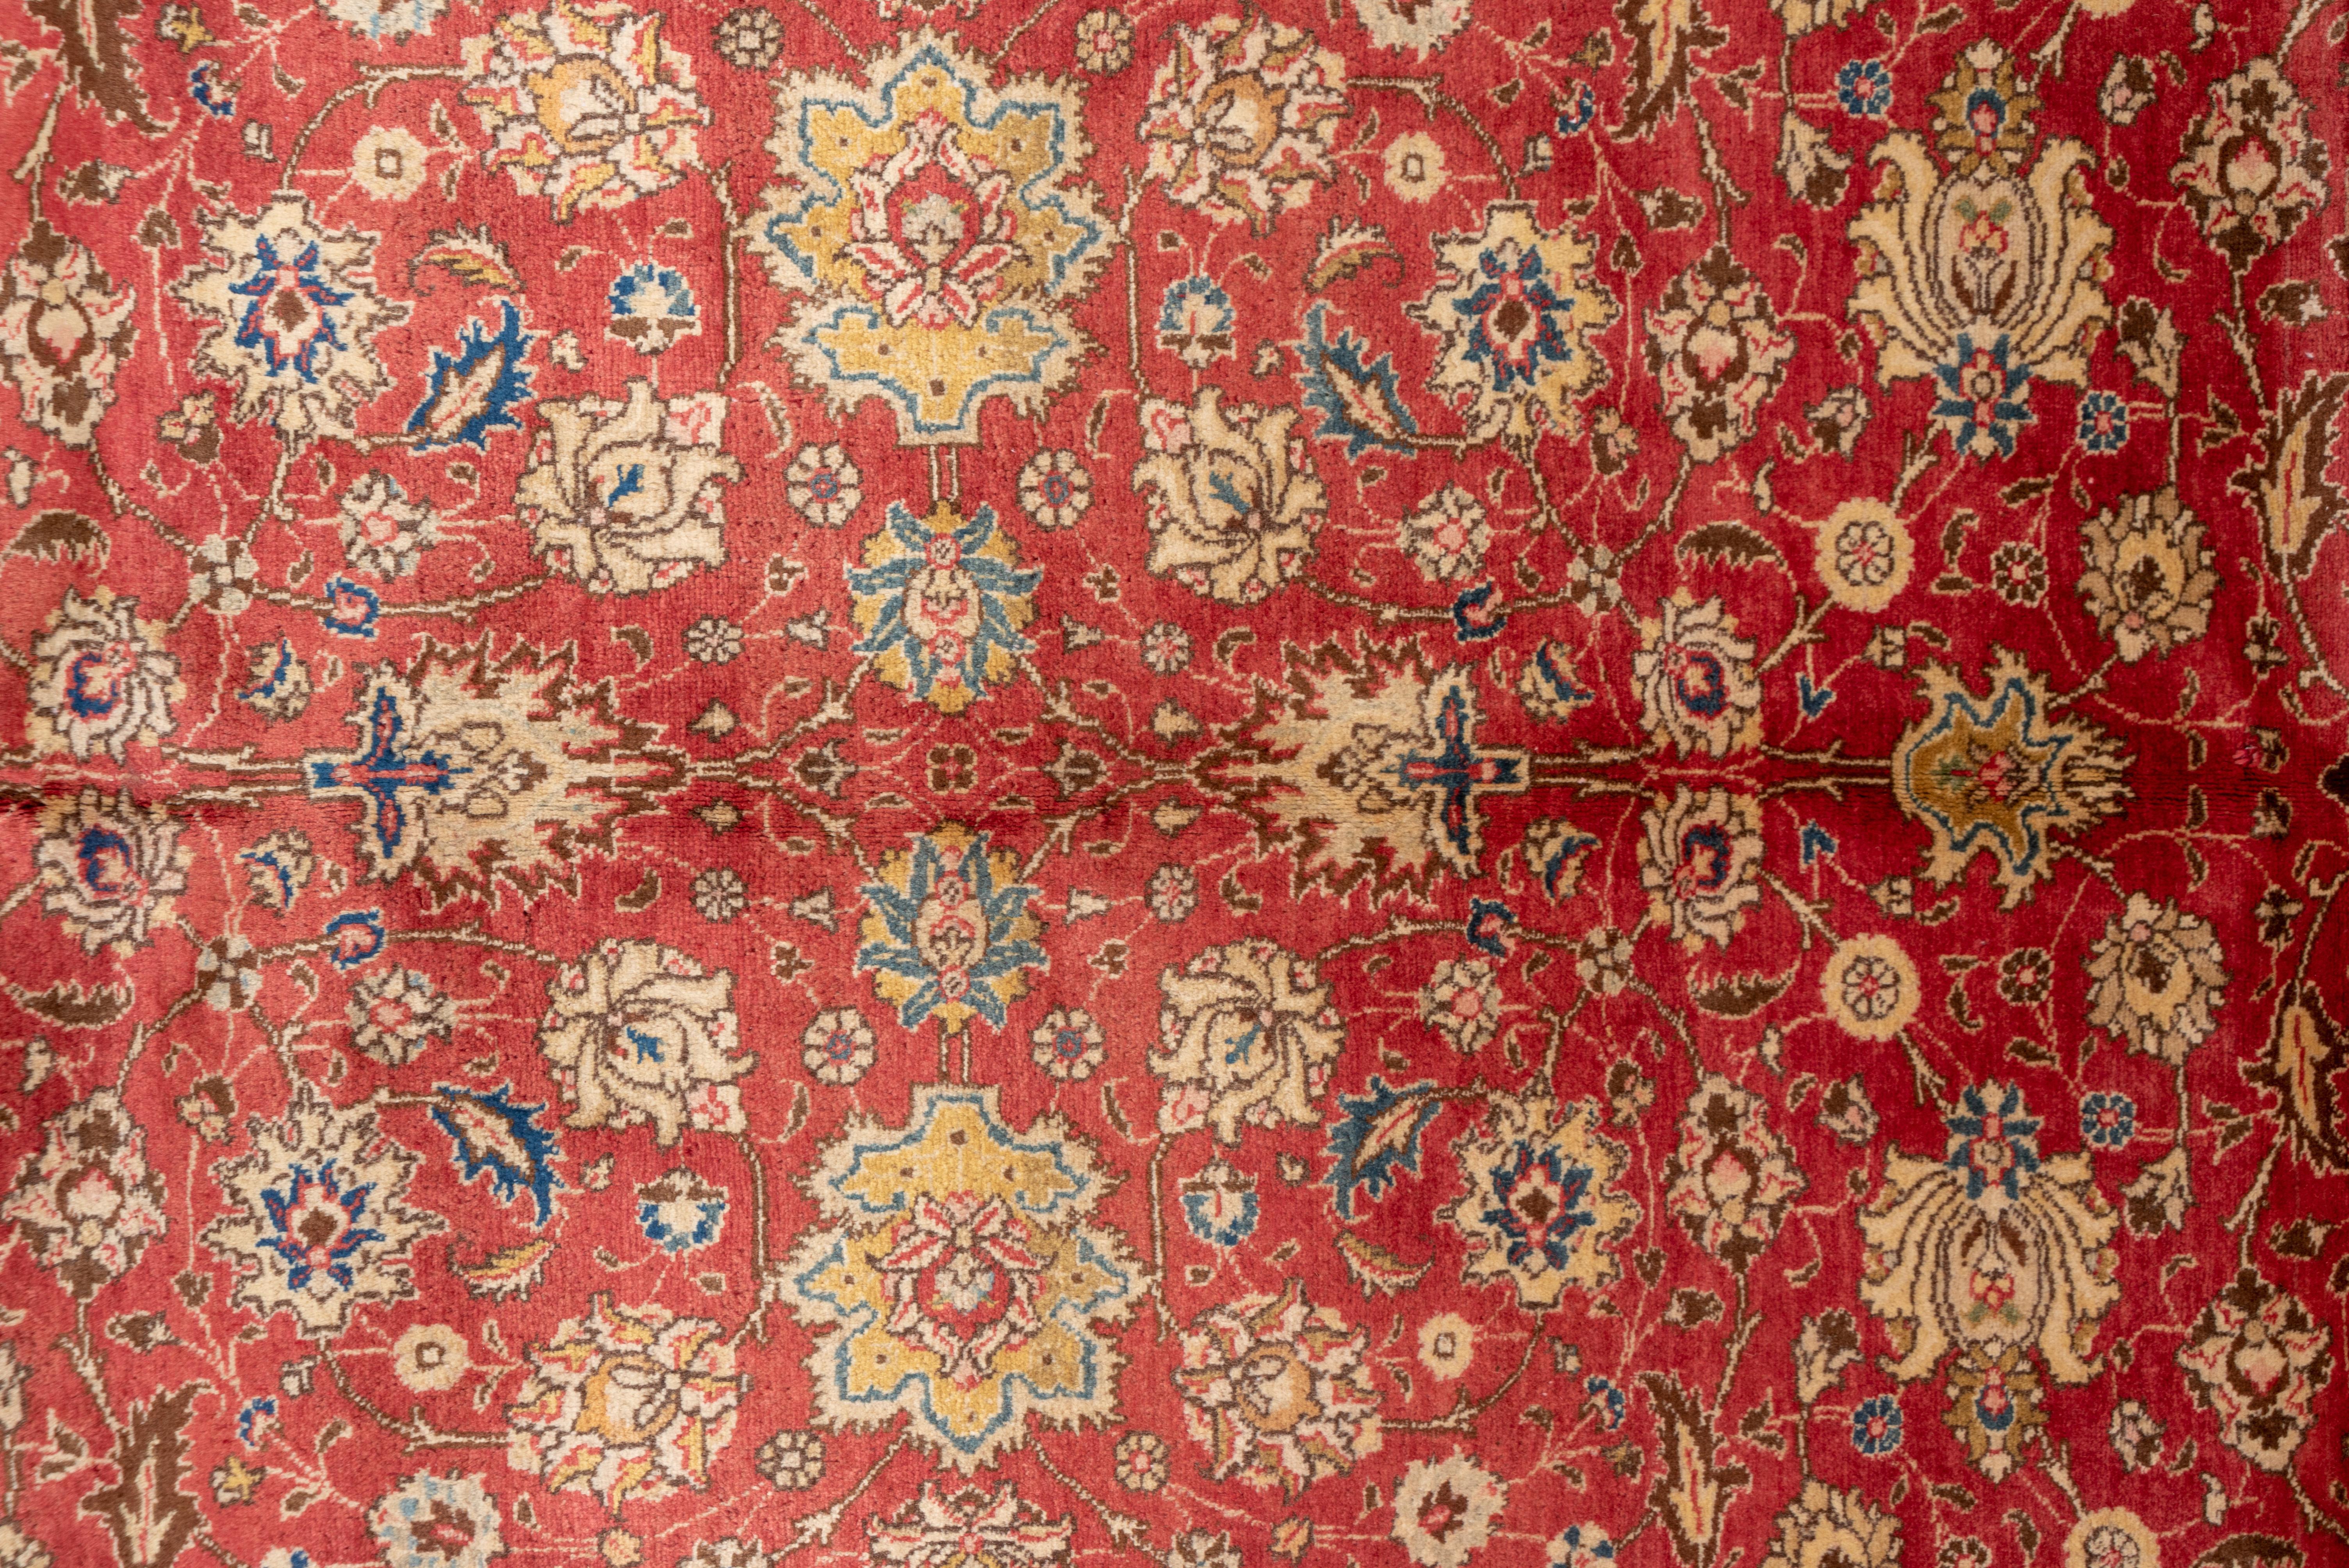 Wool Antique Persian Tabriz Rug, Red Floral Field with Blue Accents, circa 1940s For Sale